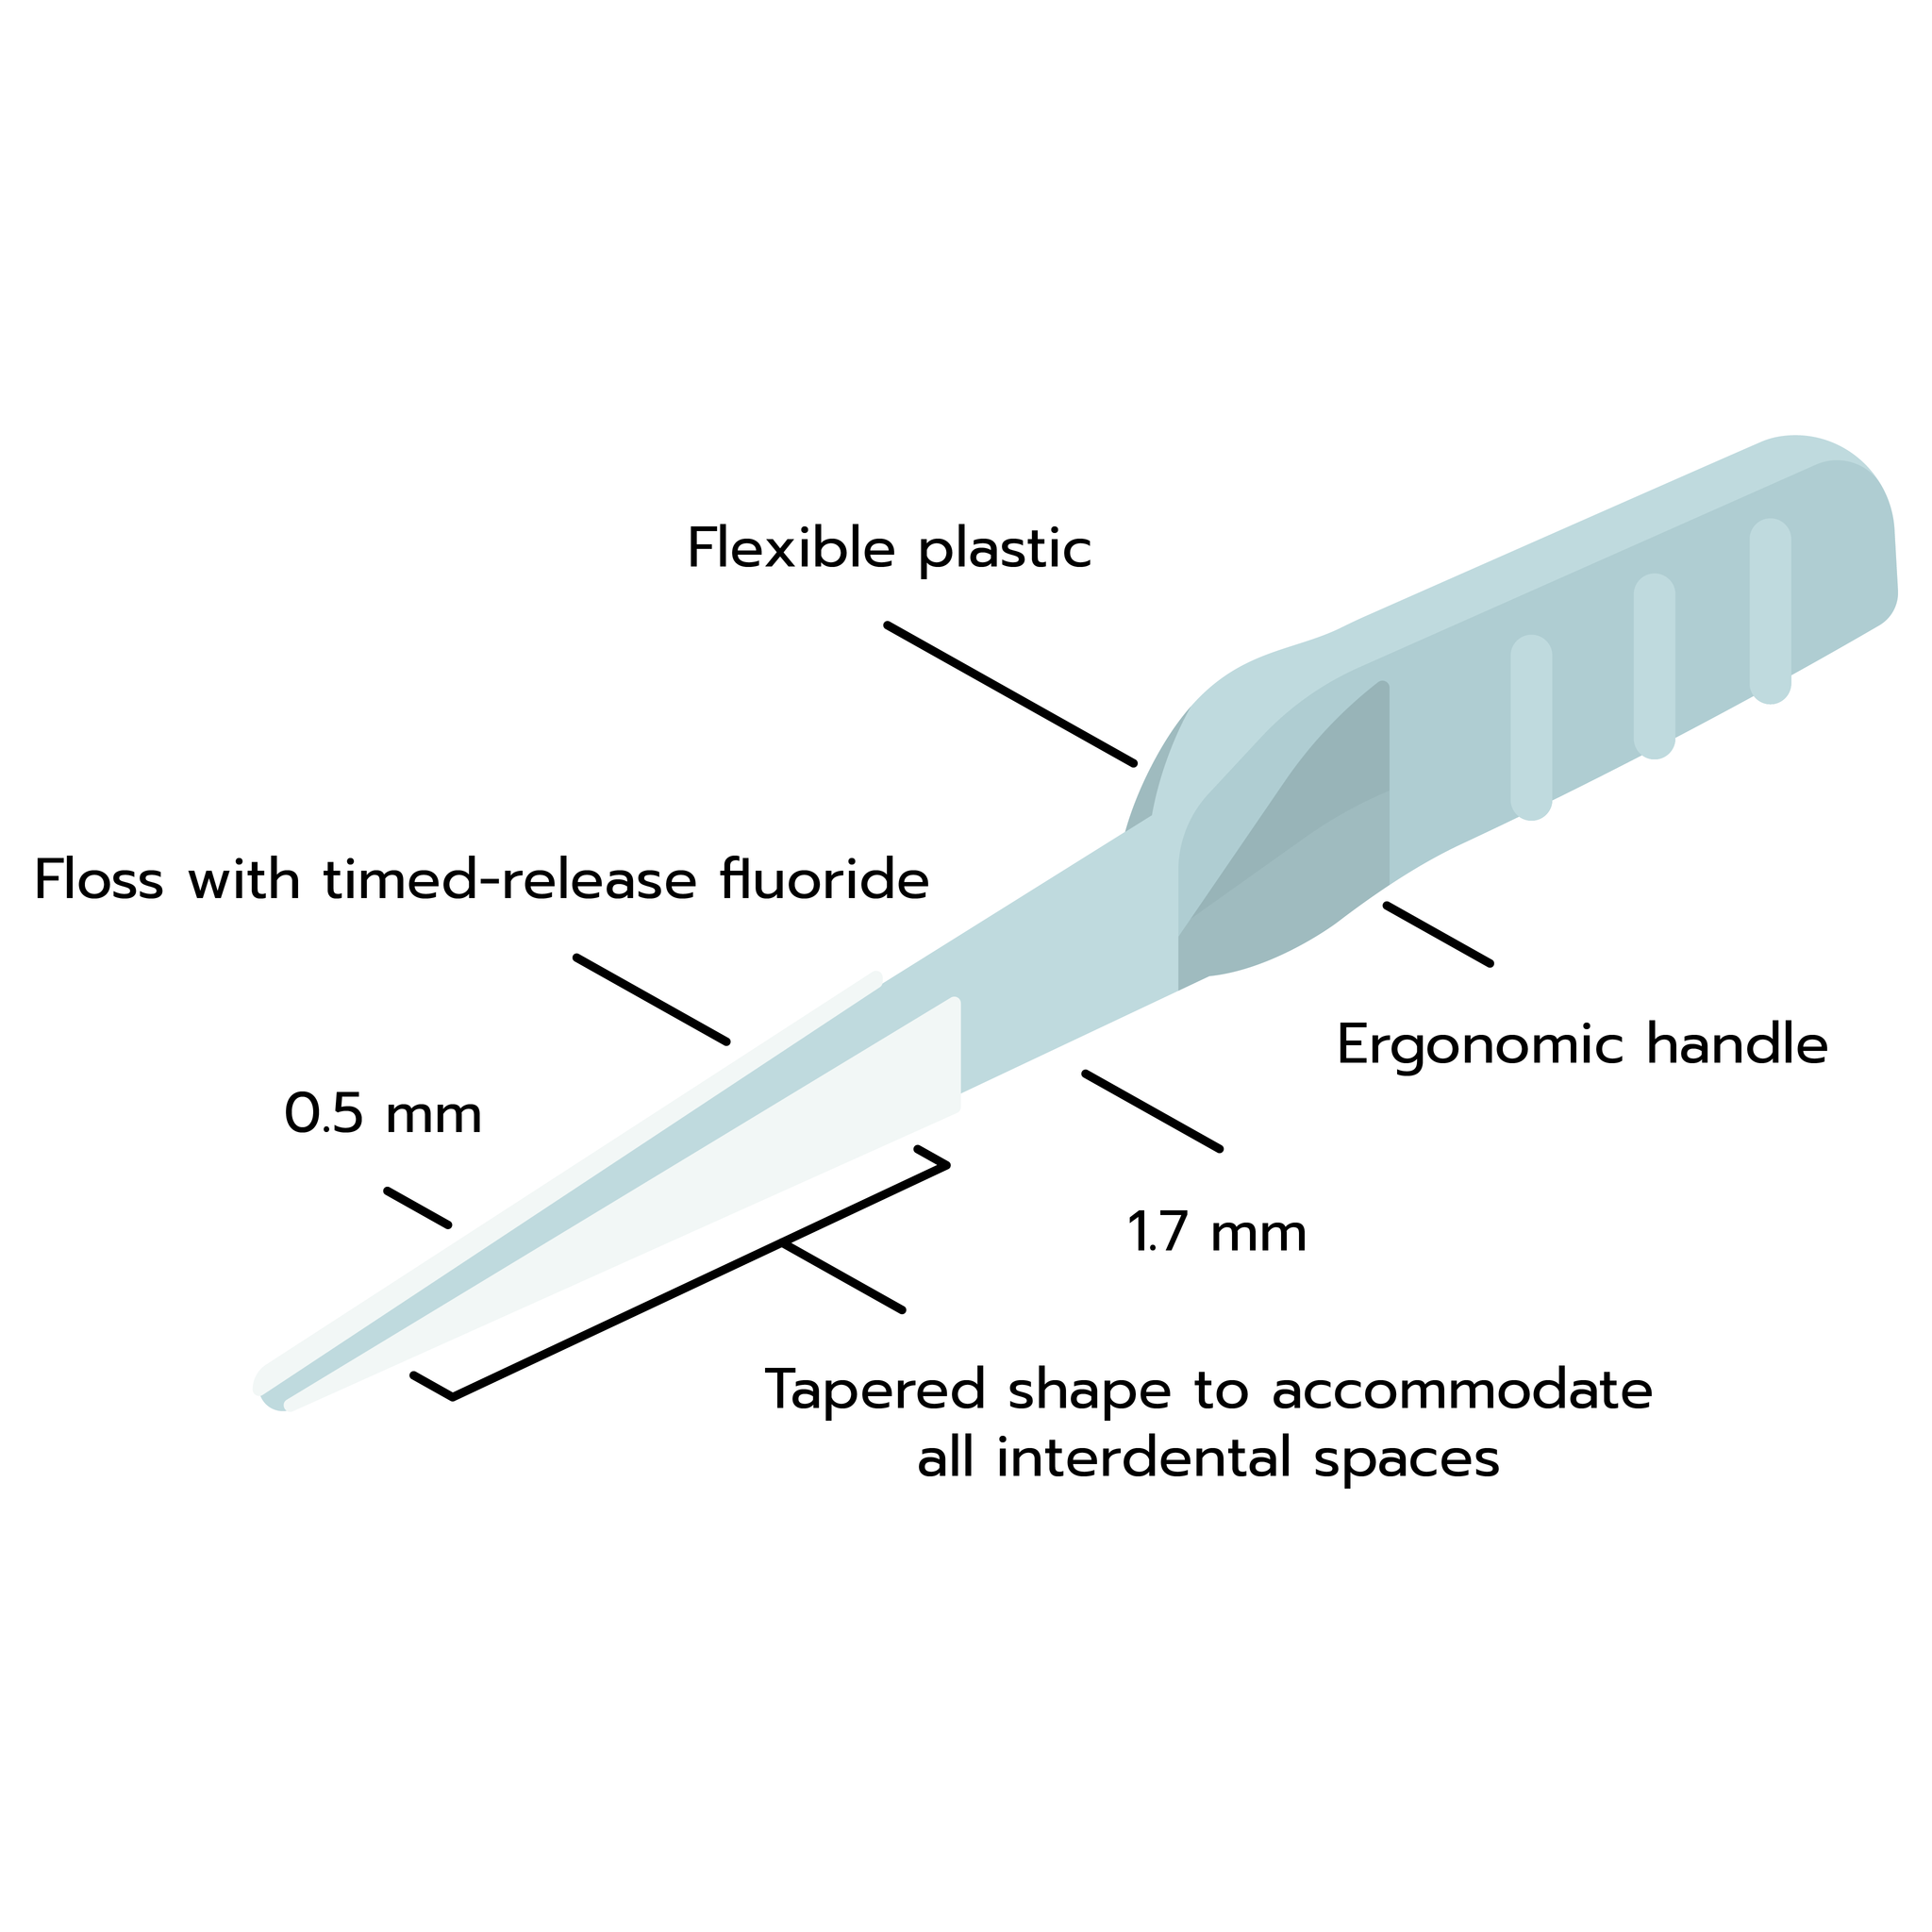 A diagram illustrating the different parts of a FLIX stick. Stick has flexible plastic, an ergonomic handle, floss with timed-release fluoride, and a tapered shape to accommodate all interdental spaces. Taper is 1.7 millimeters to 0.5 millimeters.